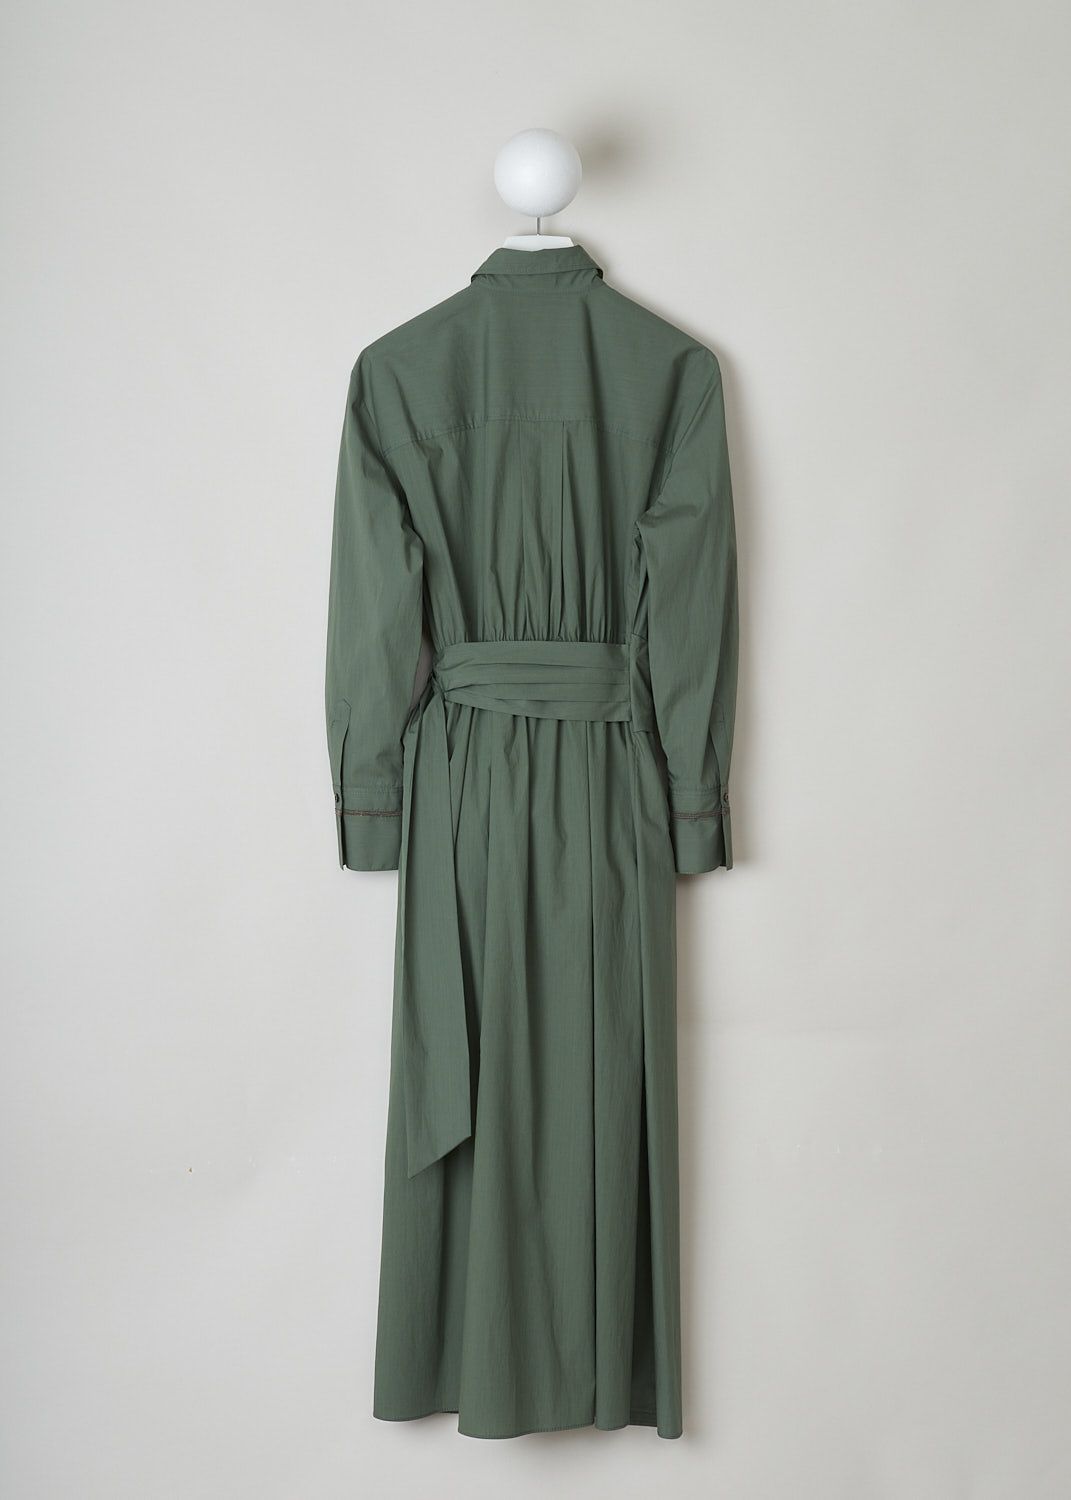 BRUNELLO CUCINELLI, GREEN SHIRT DRESS WITH WRAP DETAIL, M0H93A4873_C8625, Green, Back, This green midi shirt dress has a classic collar and concealed front button closure that goes down to the waistband. The waistband is elasticated at the back. The waist is accentuated by the wrap detail, that goes around like a belt and is fastened to one side with the metal buckle. The long sleeves have buttoned cuffs and are decorated with a monili beaded trim.
